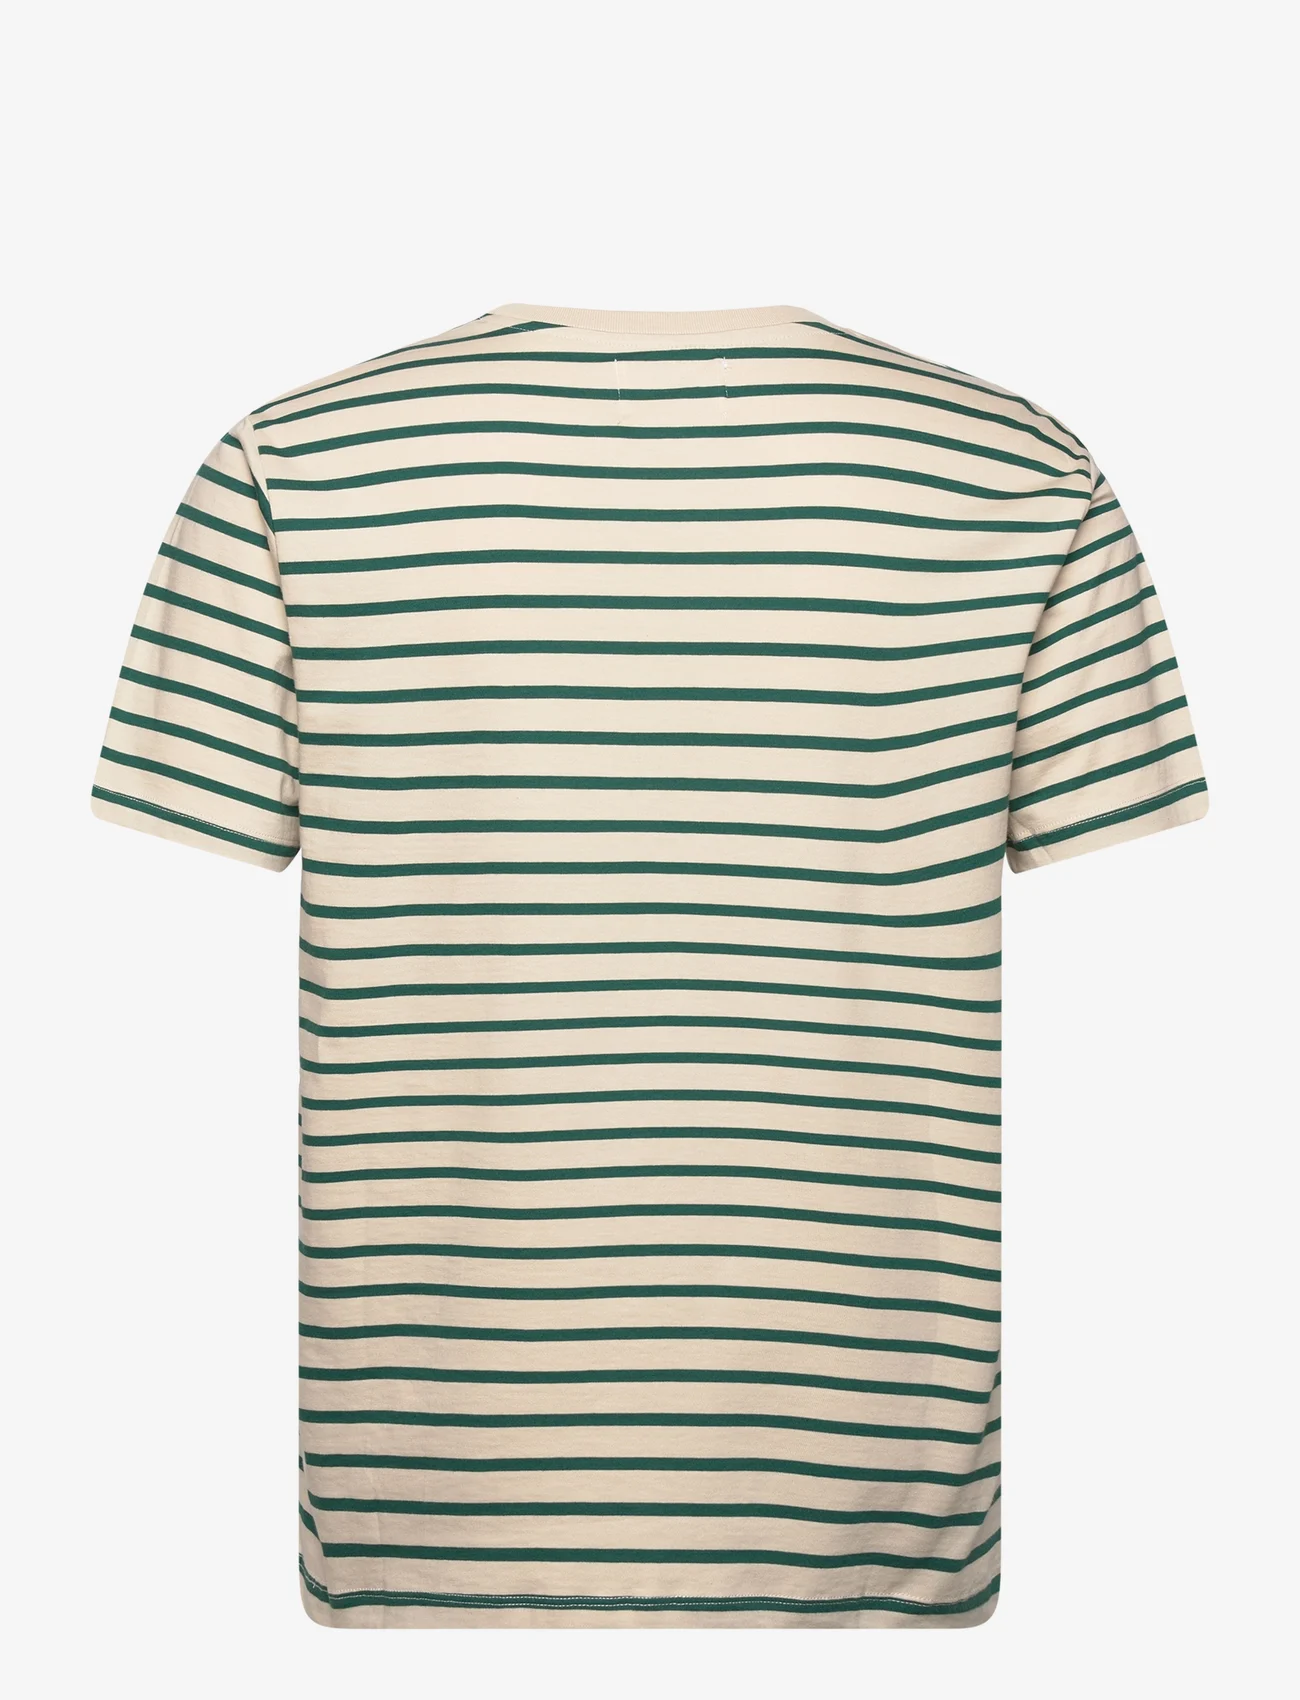 Double A by Wood Wood - Ace badge T-shirt - t-shirt & tops - foggy striped - 1